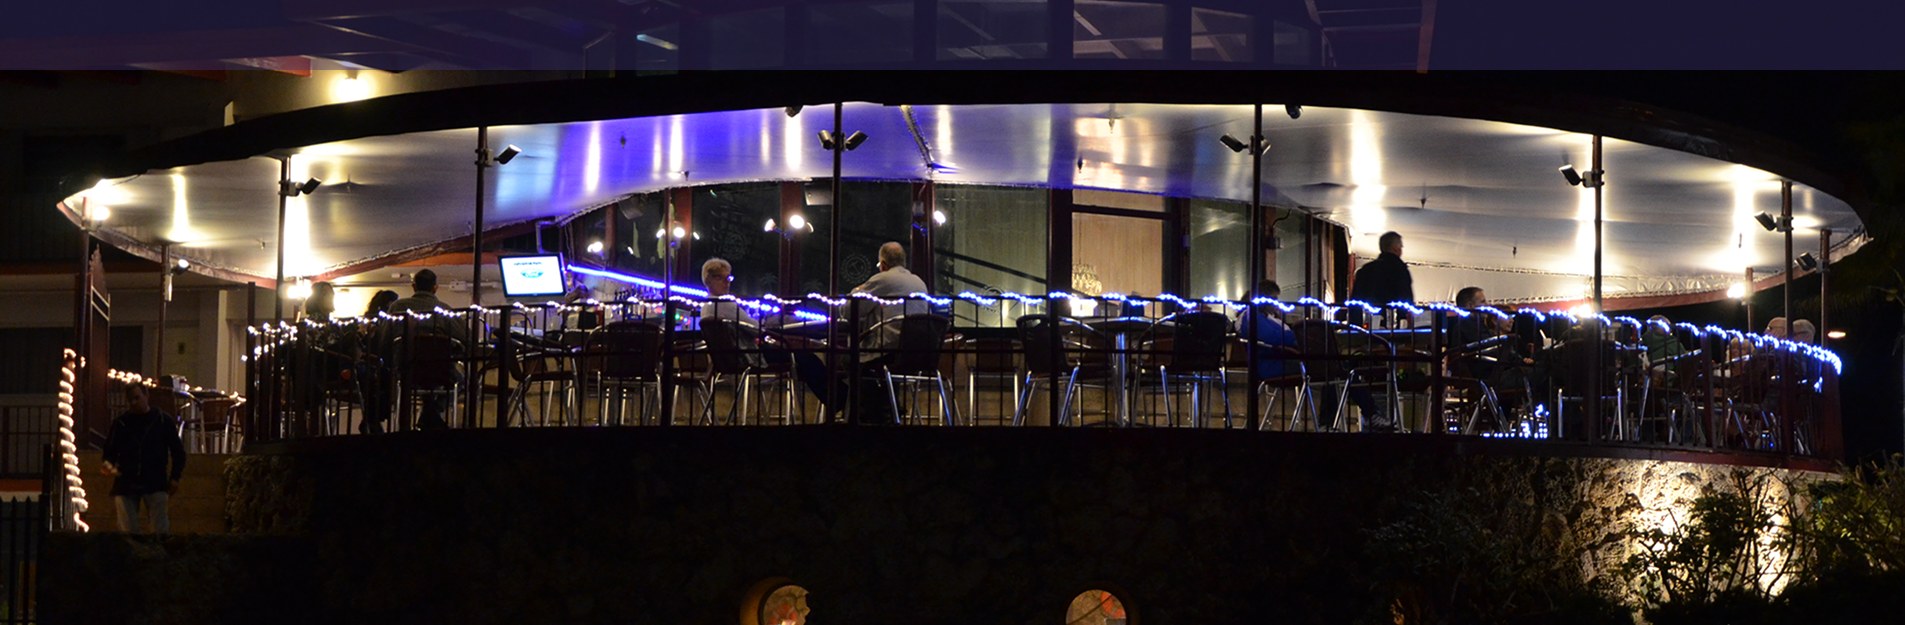 The Deck Restaurant at night